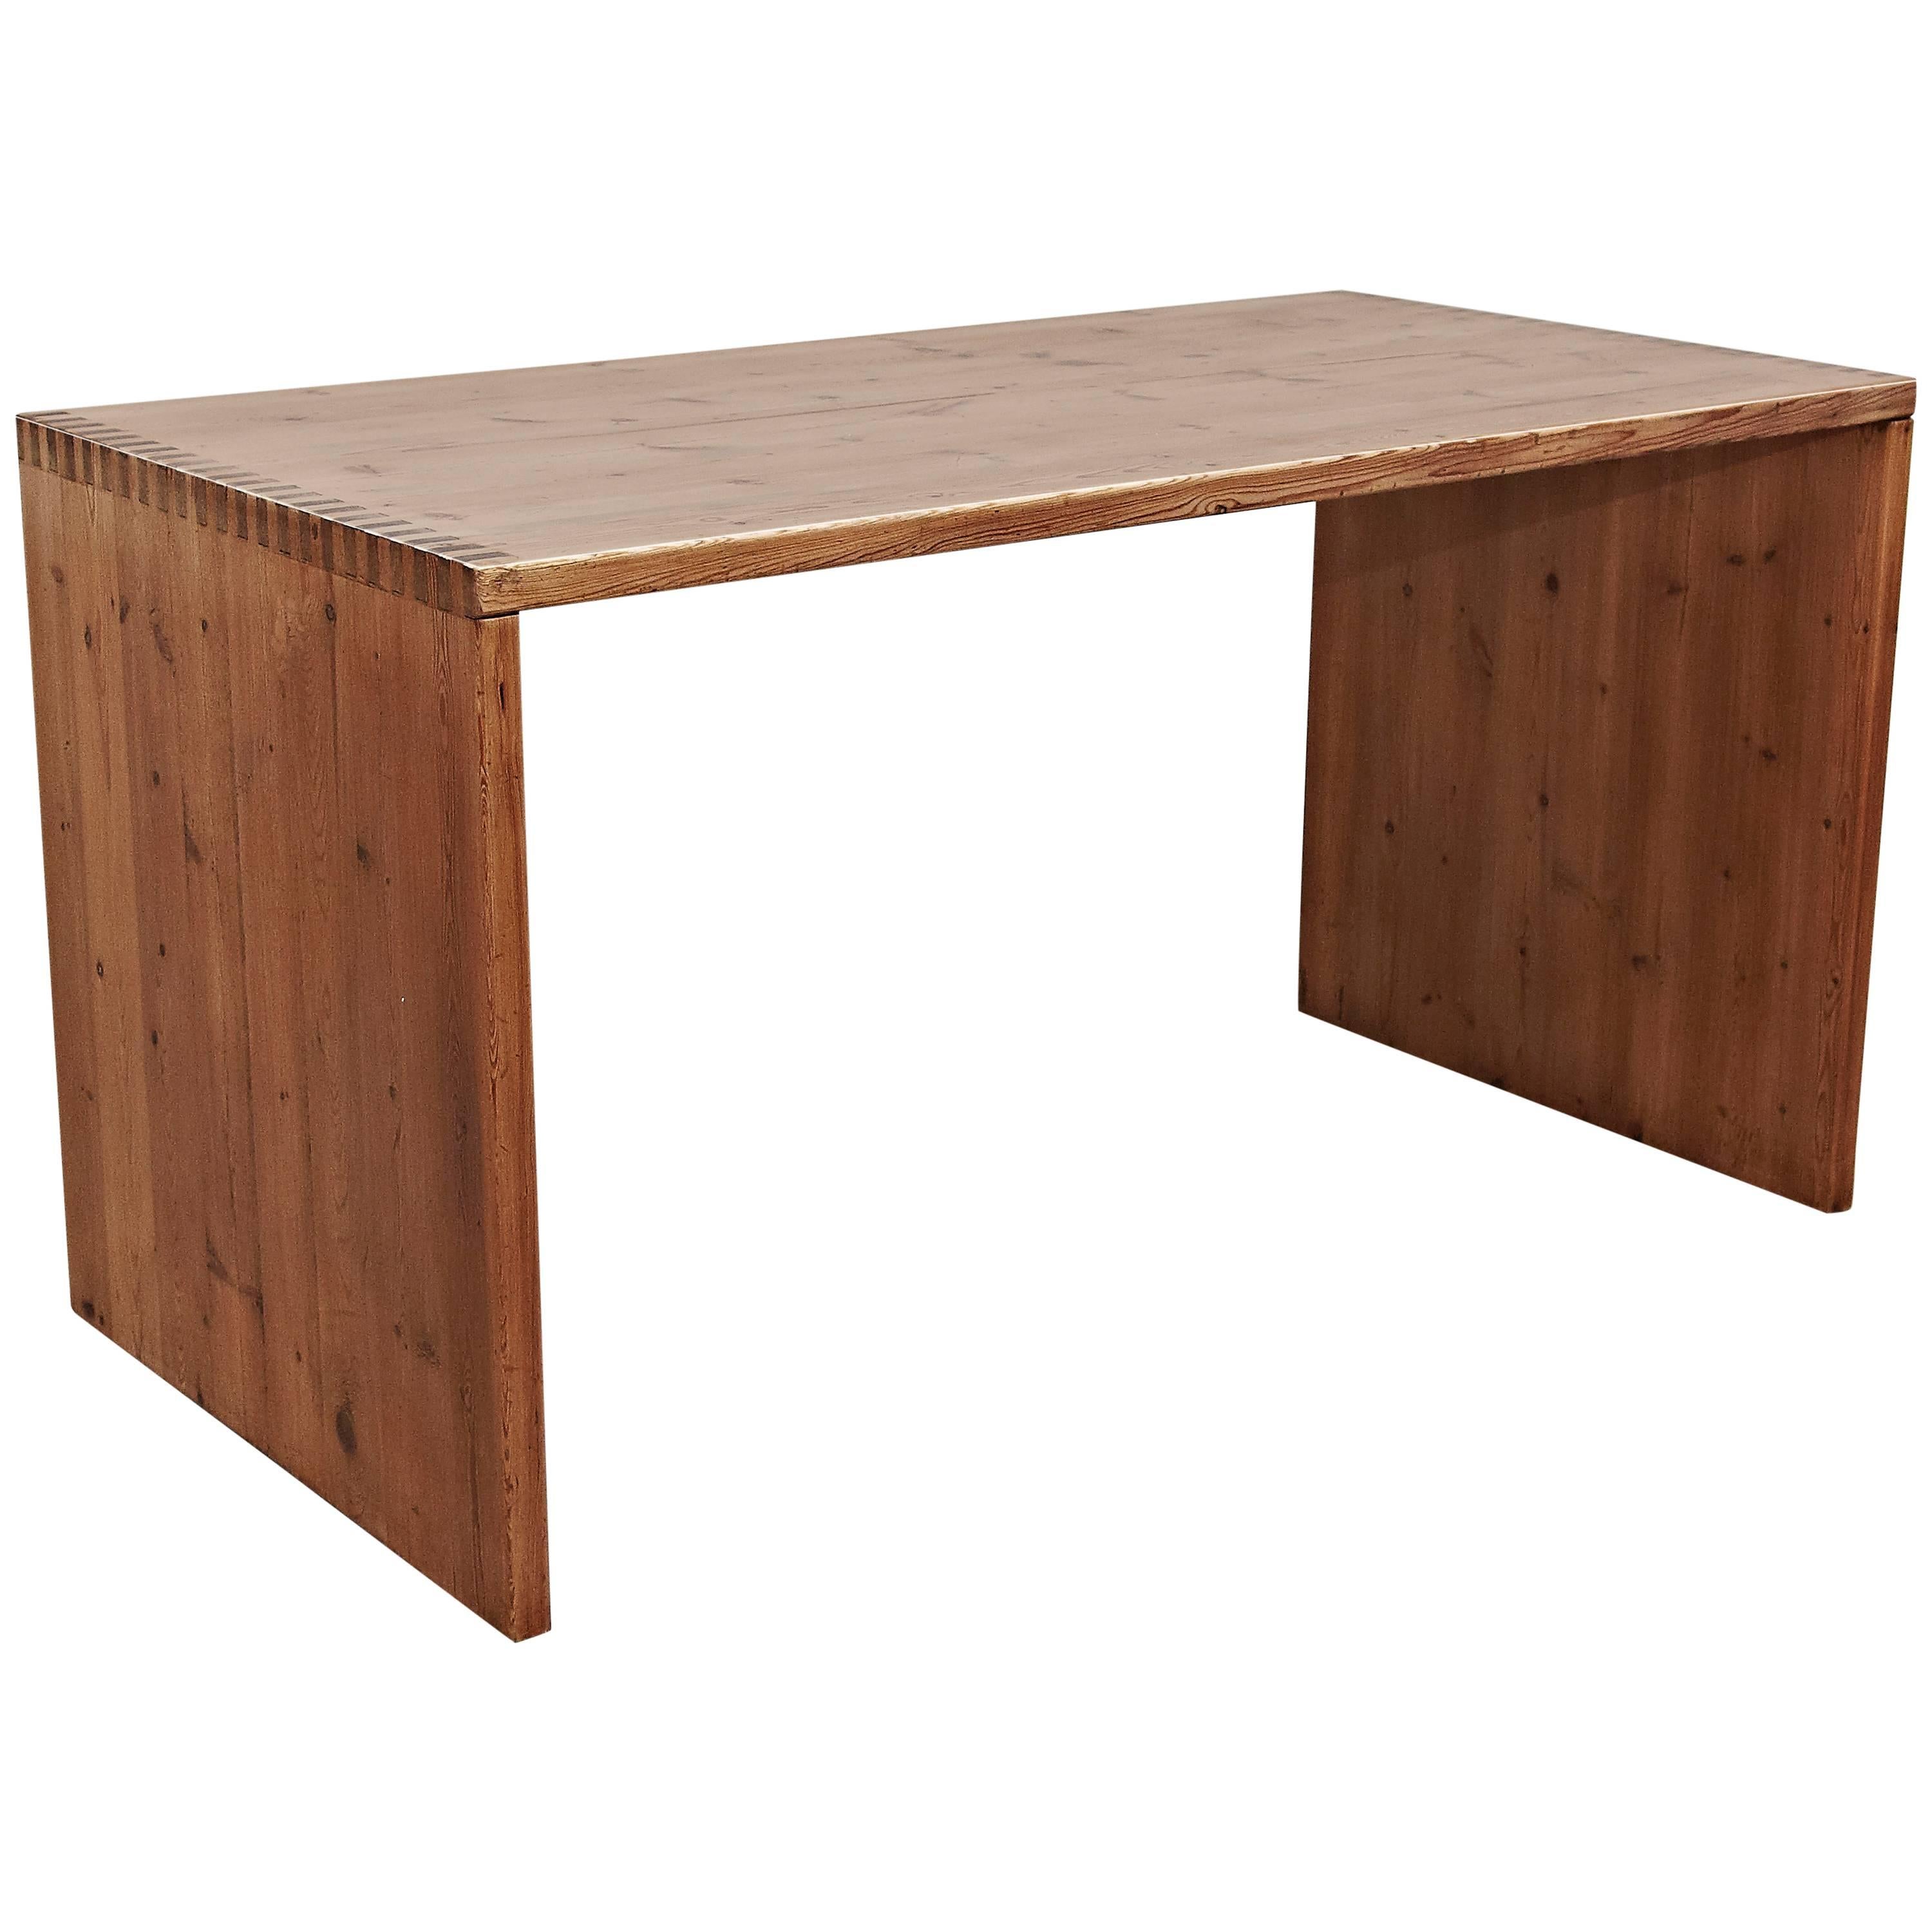 French Mid Century Modern Rational Wood Dining Table, circa 1950